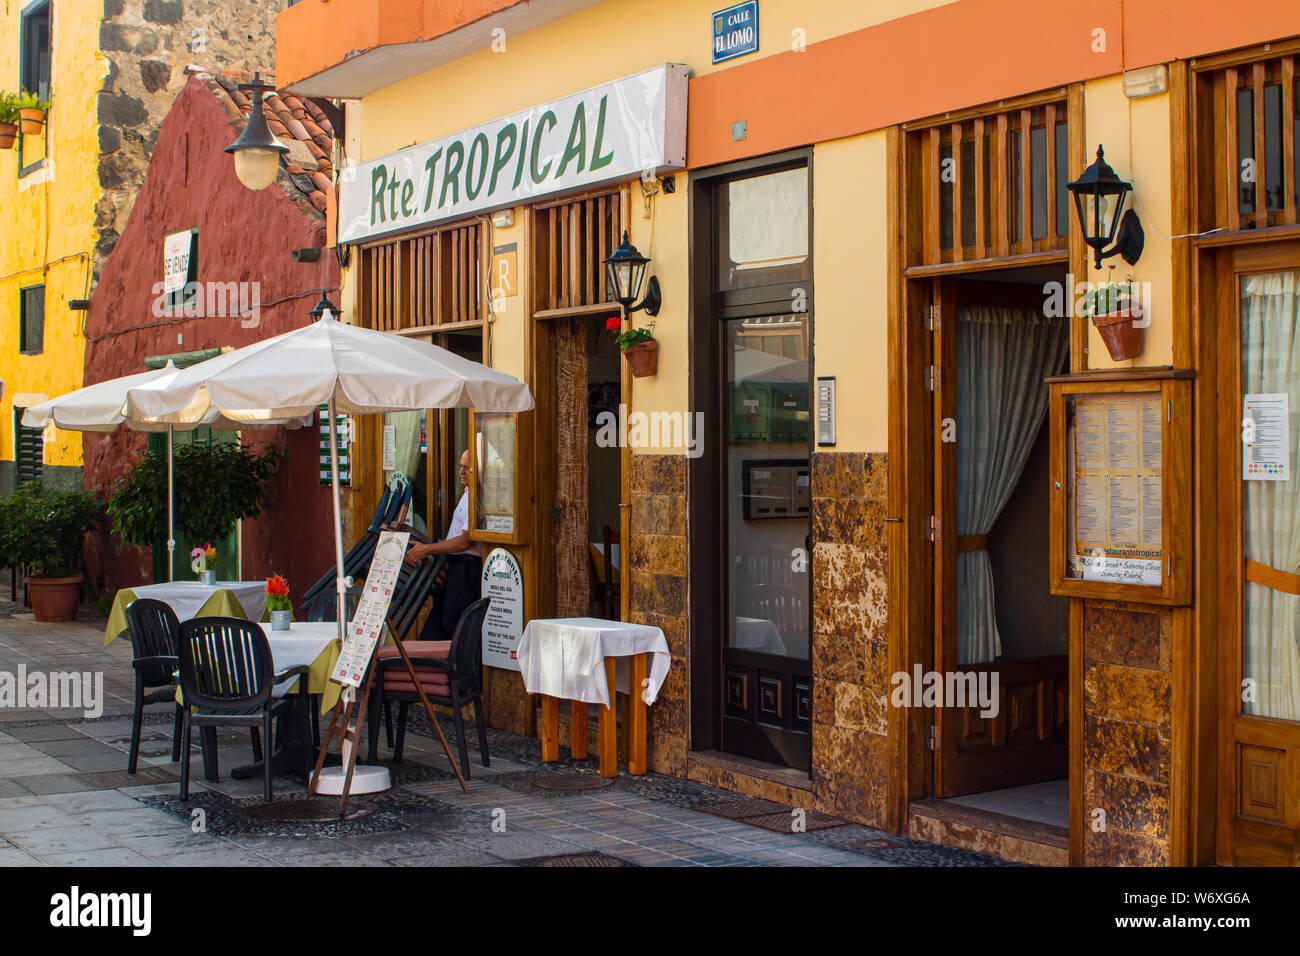 Restaurant on the Spanish Island of Tenerife. The owner is getting ready for the day's service. Stock Photo